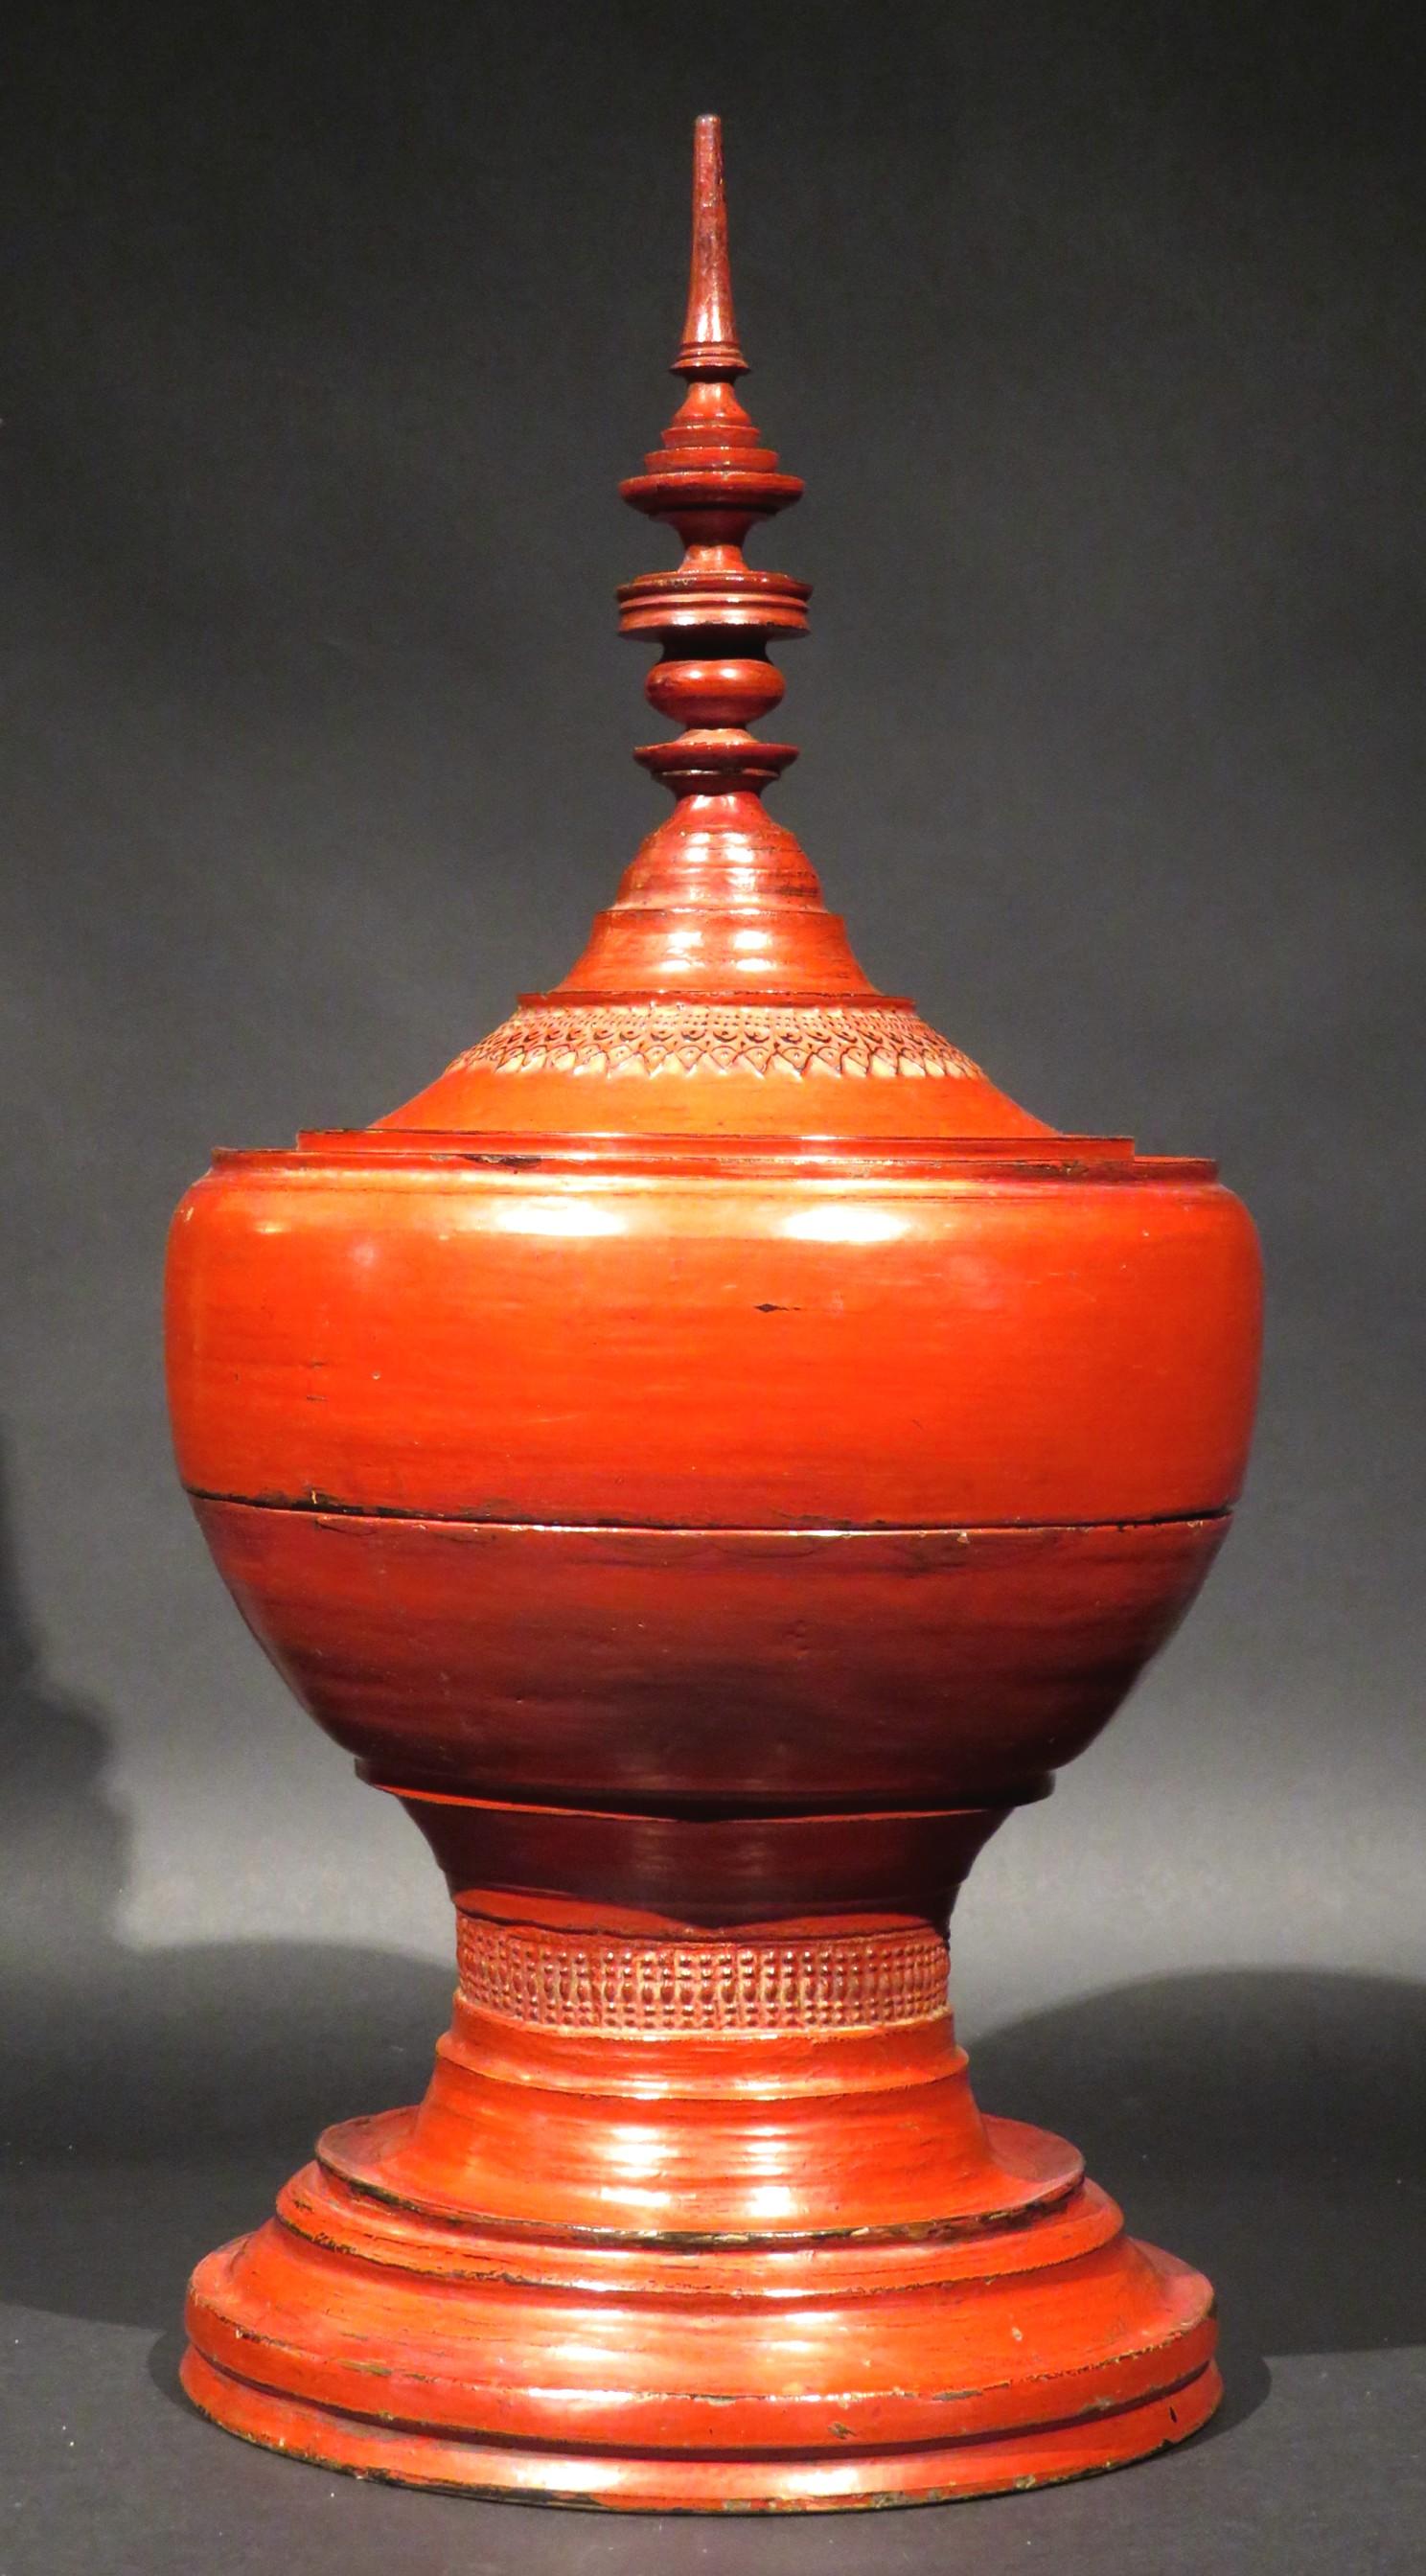 A highly decorative and visually striking antique Burmese (Myanmar) food container, constructed by hand using turned wood & bamboo, then hand carved and decorated overall in a striking vermillion red lacquer. 
These vessels were used to carry food